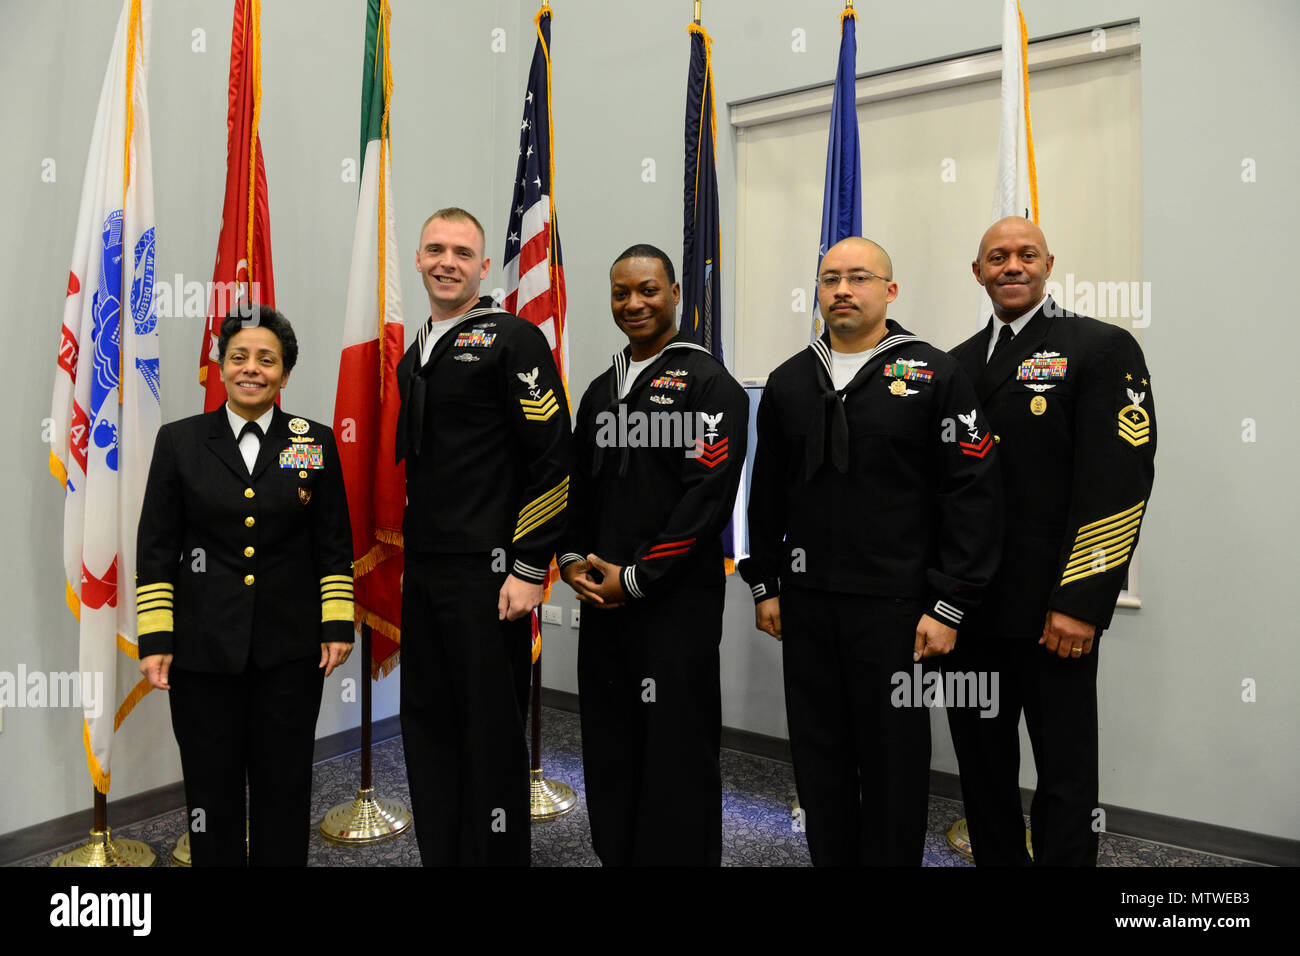 170127-N-SS492-702 NAVAL SUPPORT ACTIVITY NAPLES, Italy (Jan. 27, 2017) From left to right: Commander, U.S. Naval Forces Europe-Africa, Adm. Michelle Howard; U.S. Naval Forces Europe-Africa Sea Sailor of the Year, Intelligence Specialist 1st Class Kevin Pulley; U.S. Naval Forces Europe-Africa Shore Sailor of the Year, Hospital Corpsman 1st Class Kenneth Terrell; U.S. Naval Forces Europe-Africa Junior Sailor of the Year Yeoman 2nd Class Eric Horne and U.S. Naval Forces Europe-Africa Fleet Master Chief Raymond D. Kemp Sr. pose for a photo at the Commander, U.S. Naval Forces Europe-Africa Sailor  Stock Photo